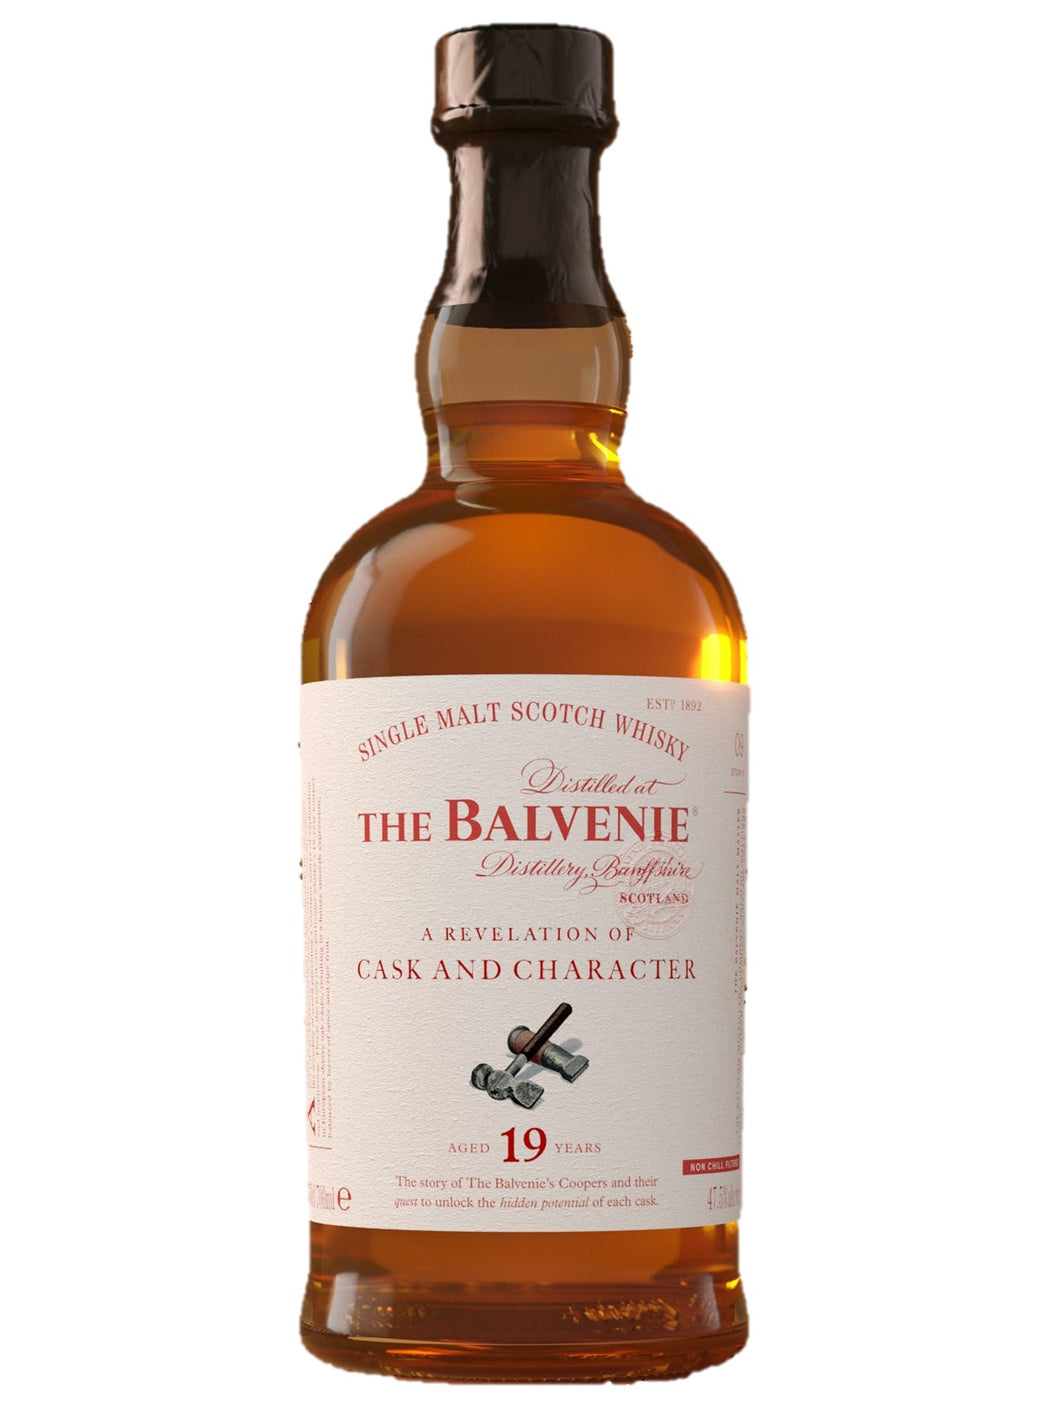 The Balvenie 'A Revelation of Cask and Character' 19 Year Old Single Malt Scotch Whisky Speyside